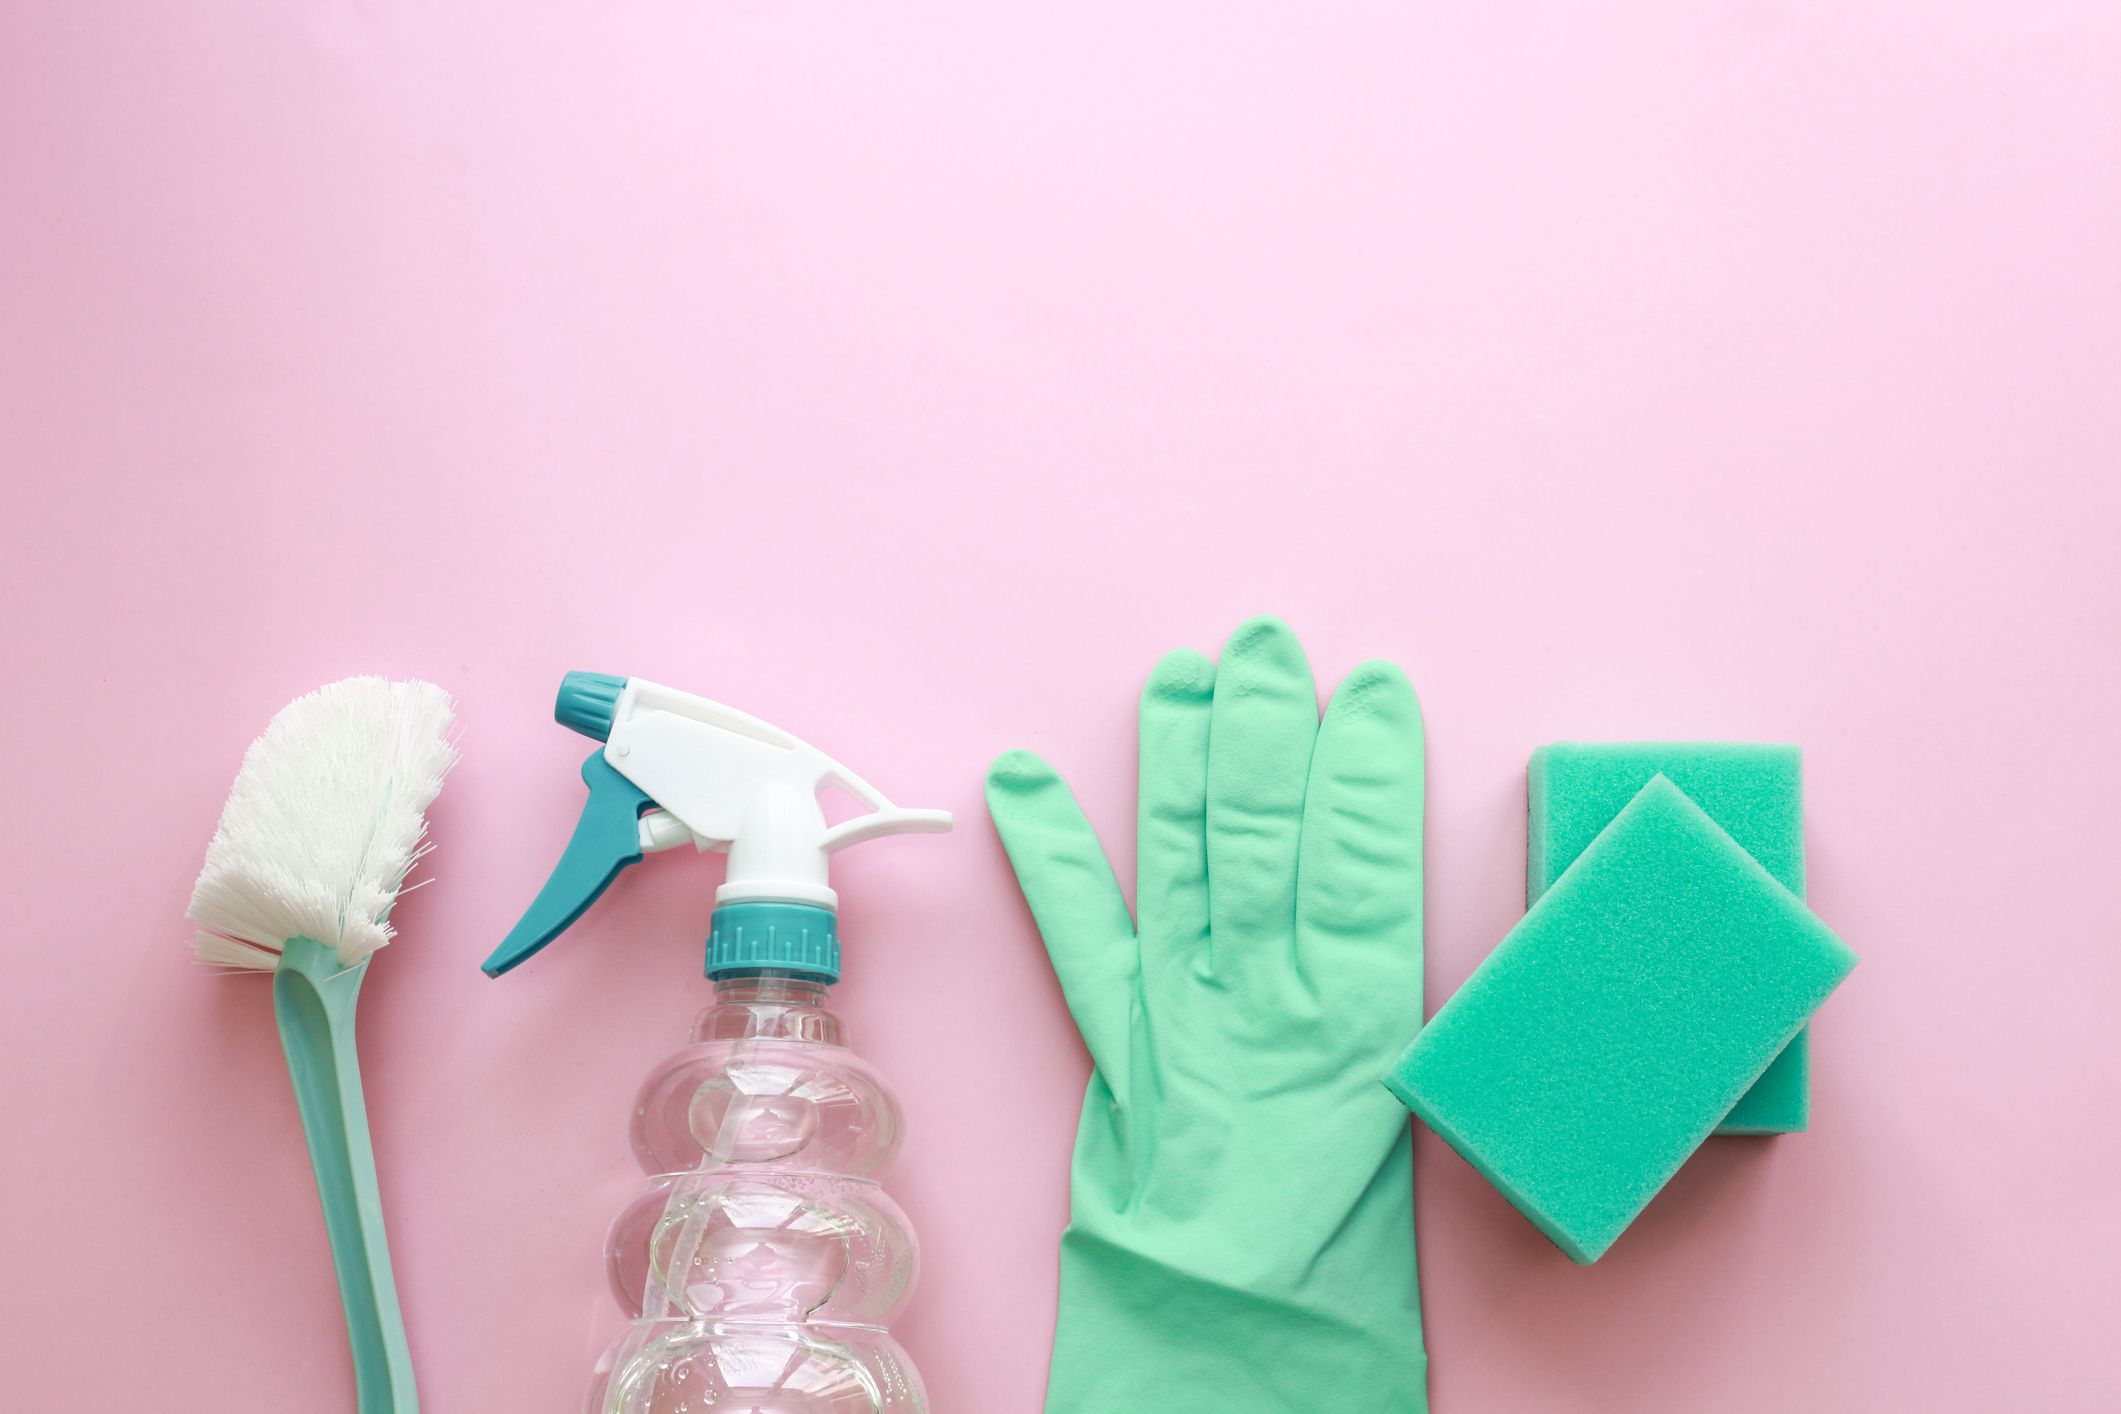 https://hips.hearstapps.com/hmg-prod/images/blue-cleaning-supplies-bottle-with-chemicals-gloves-royalty-free-image-1682086715.jpg